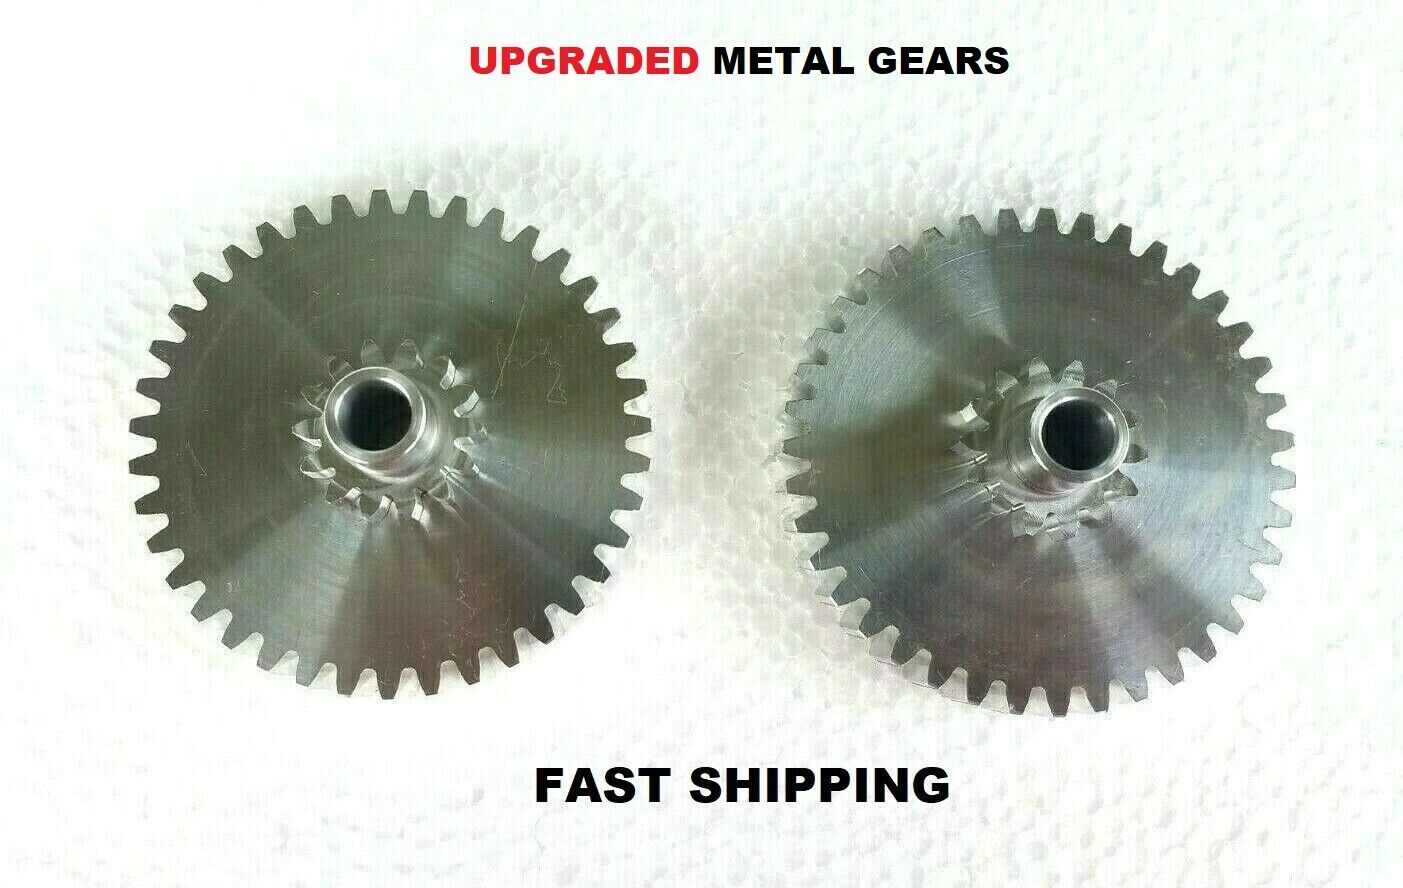 New Porsche Boxster convertible top transmission Gear Gears LEFT & RIGHT SIDE